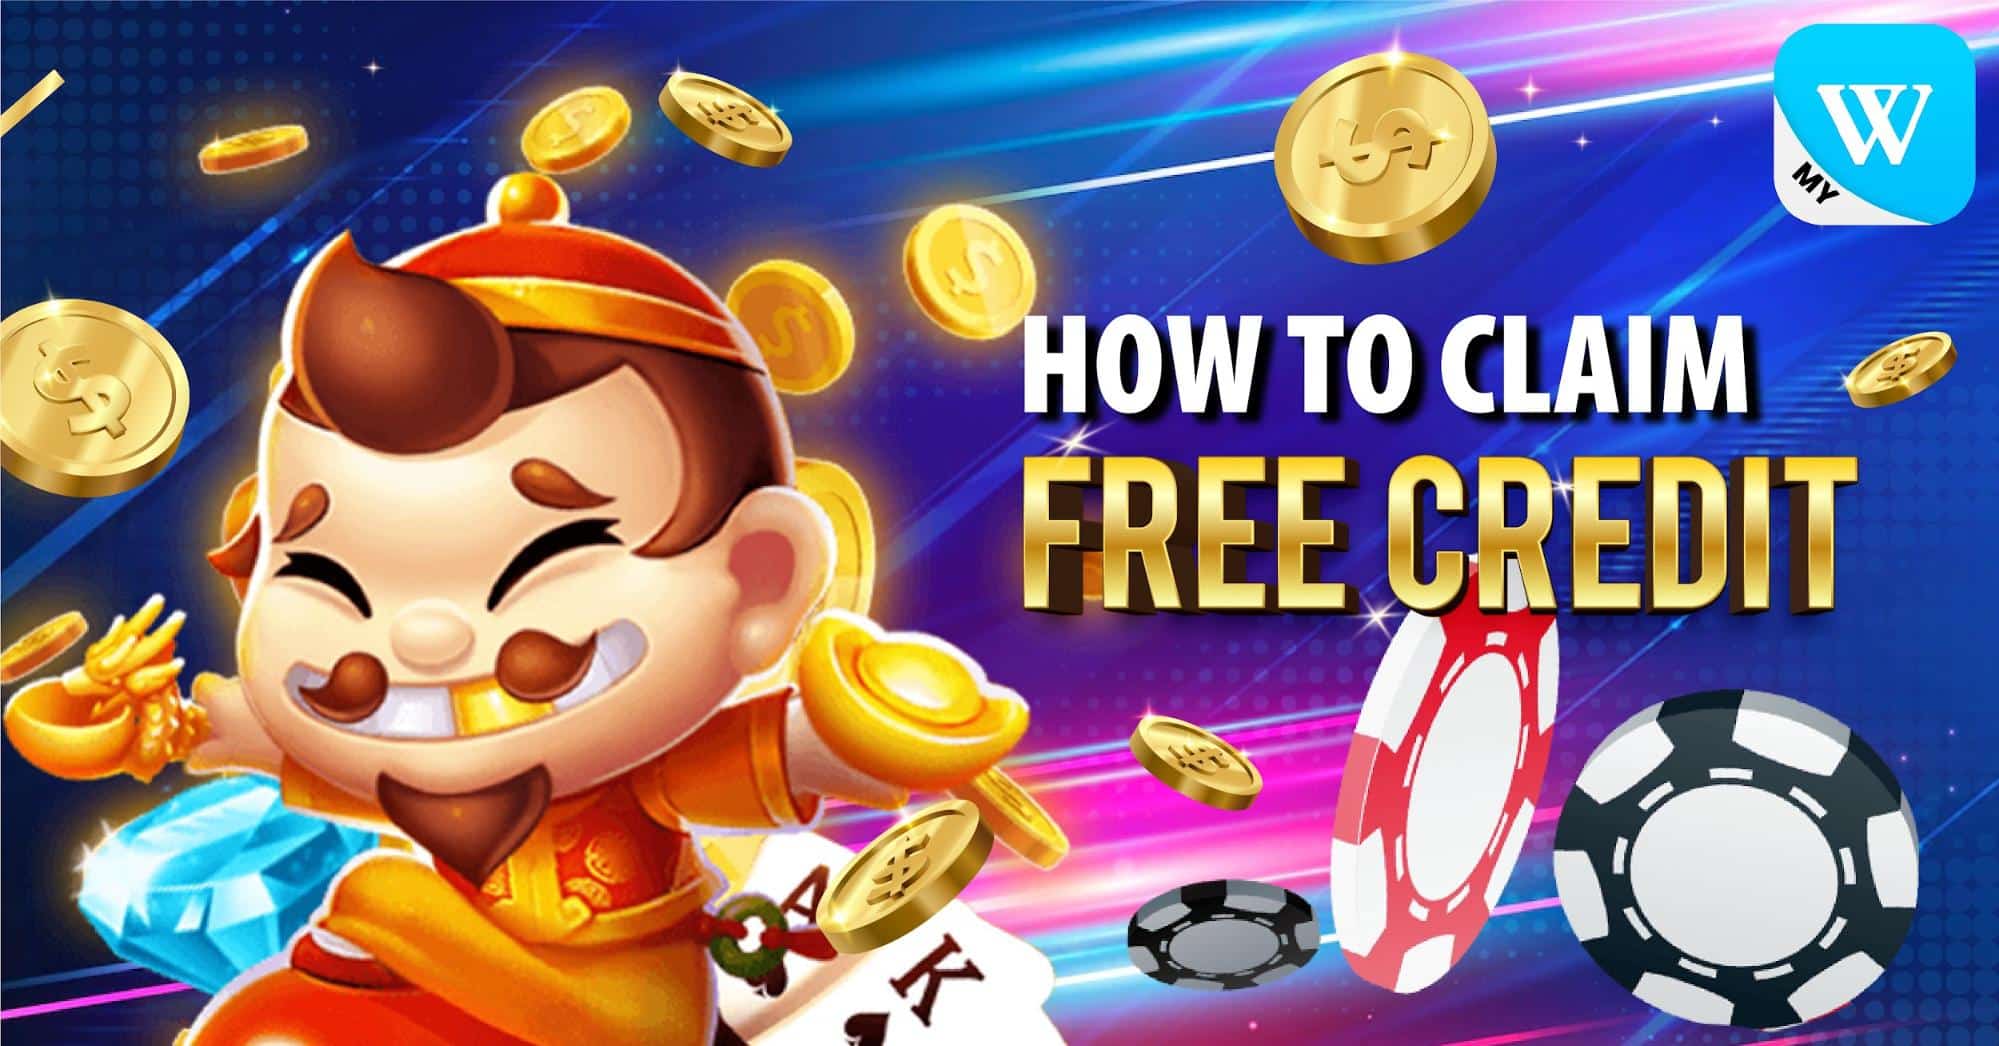 How To Claim Winbox Free Credit